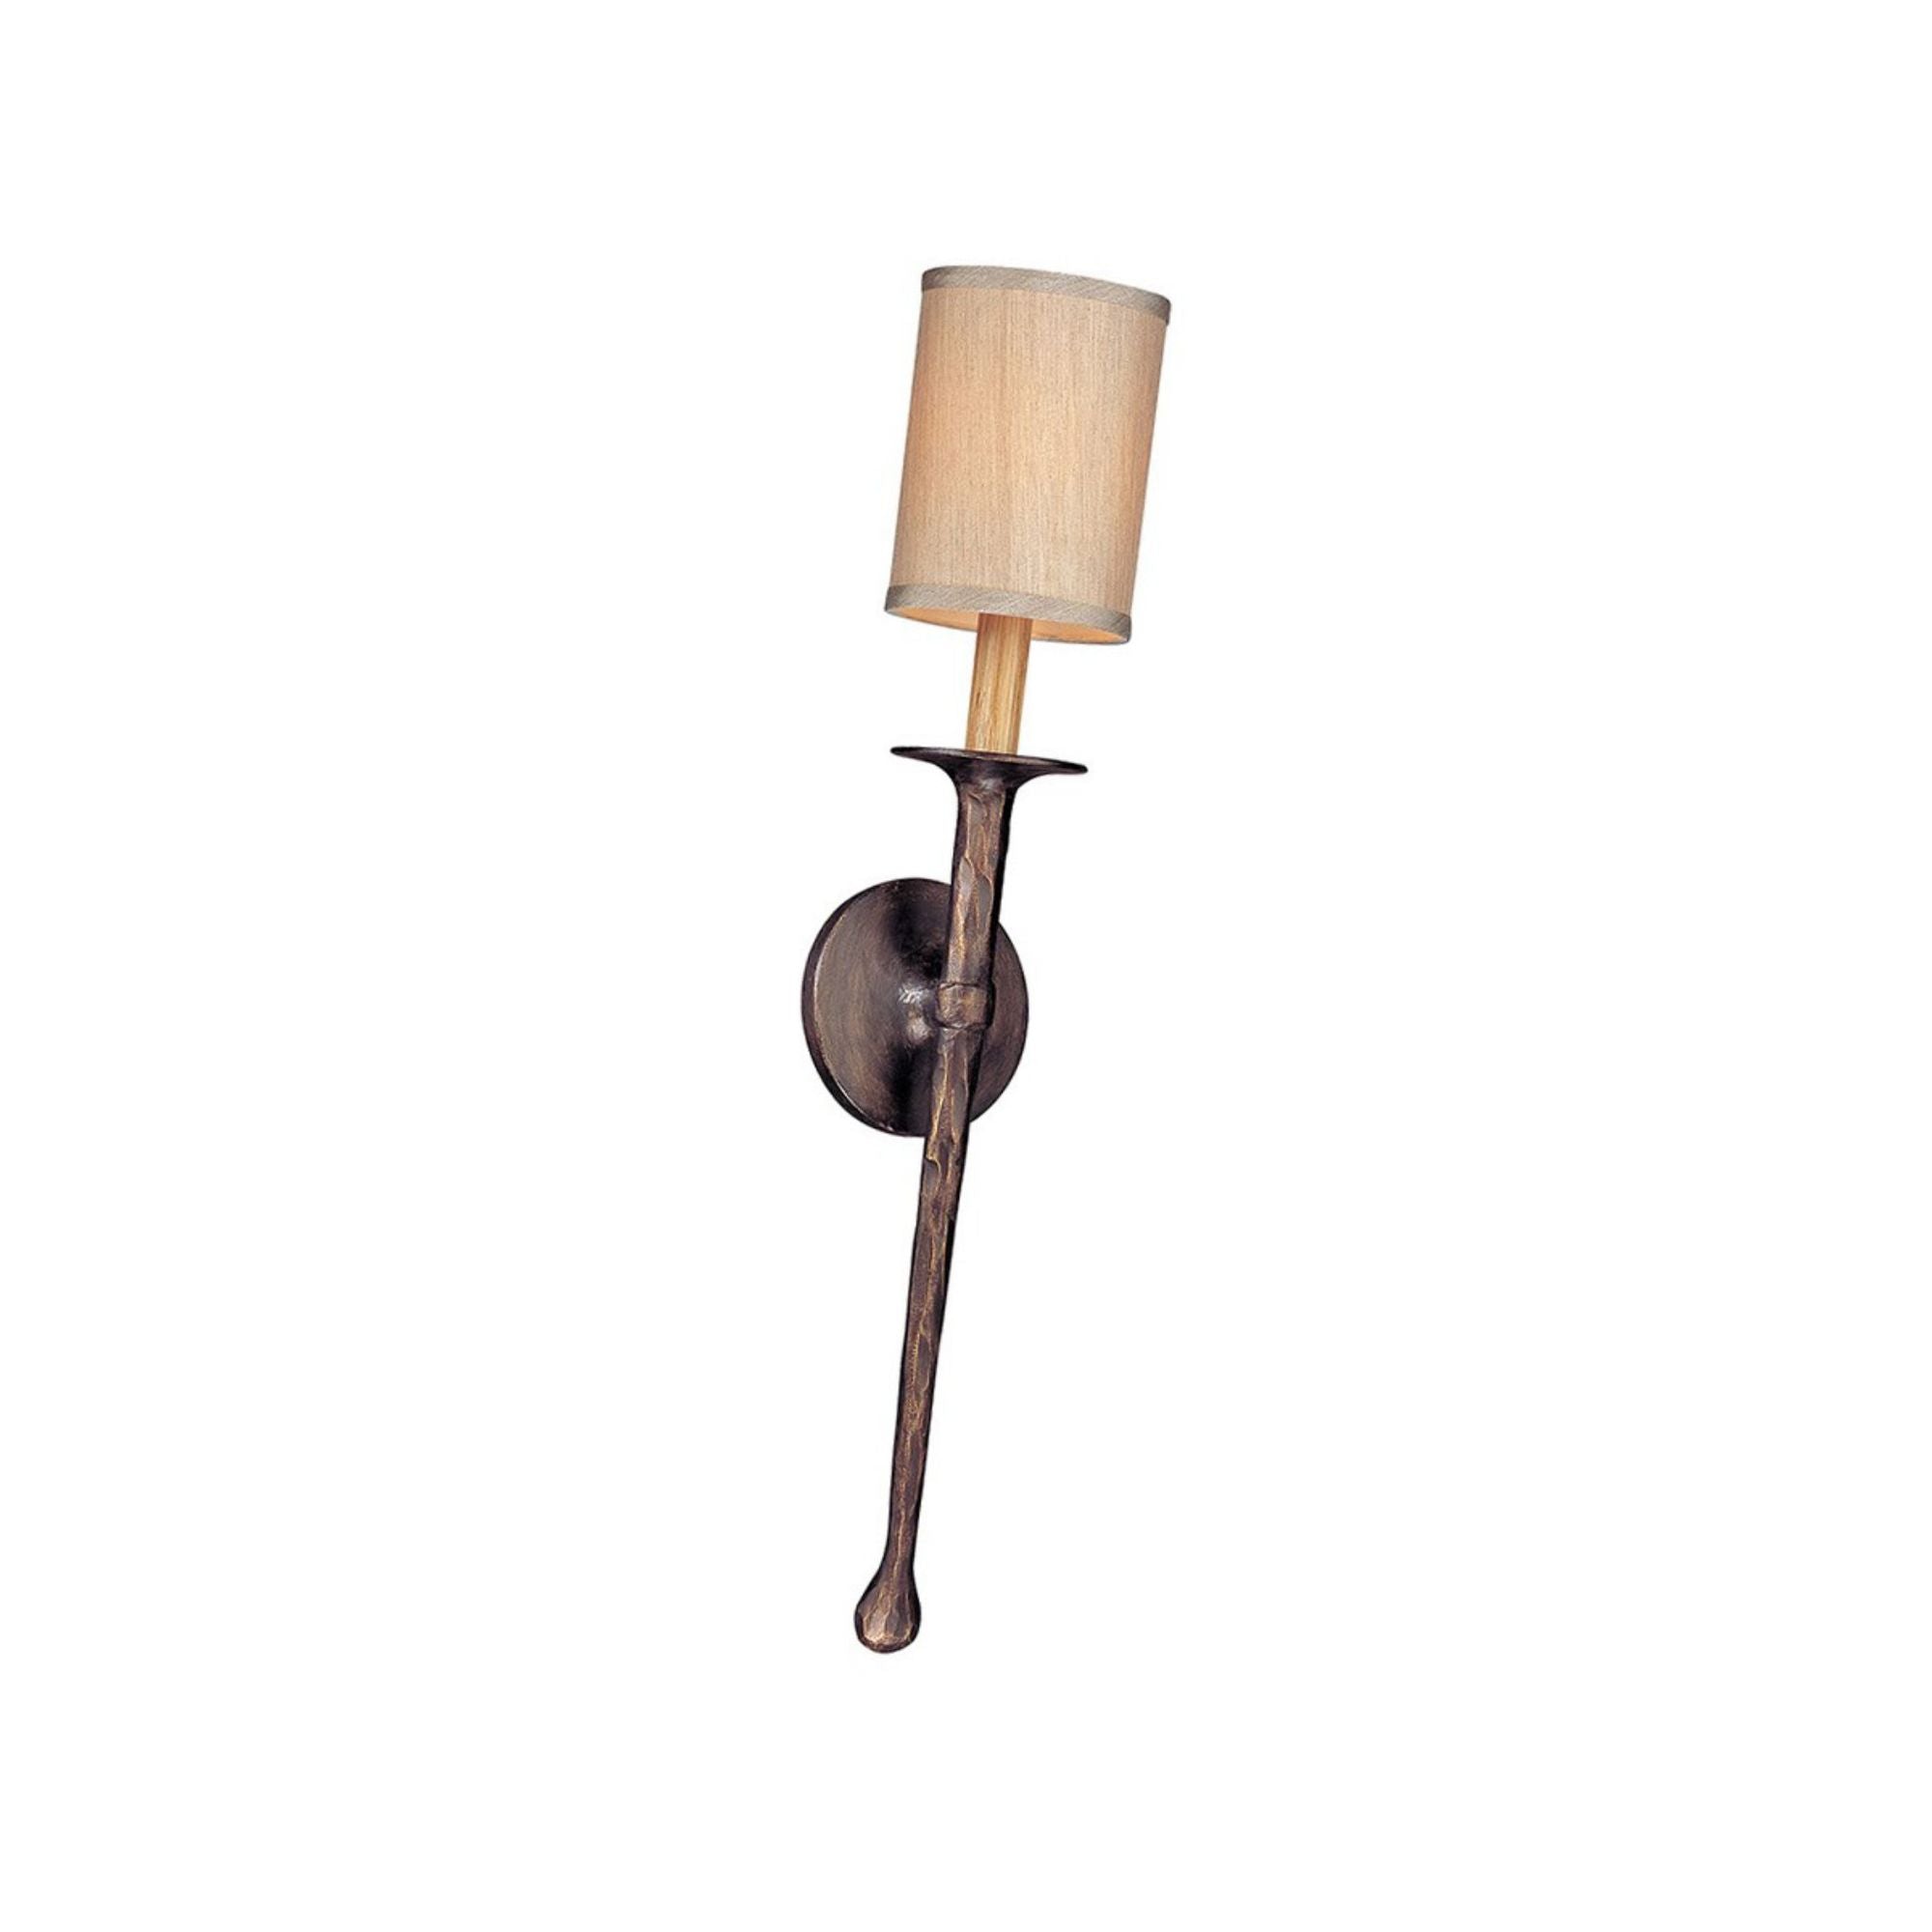 Faulkner 1 Light Wall Sconce in Forged Iron